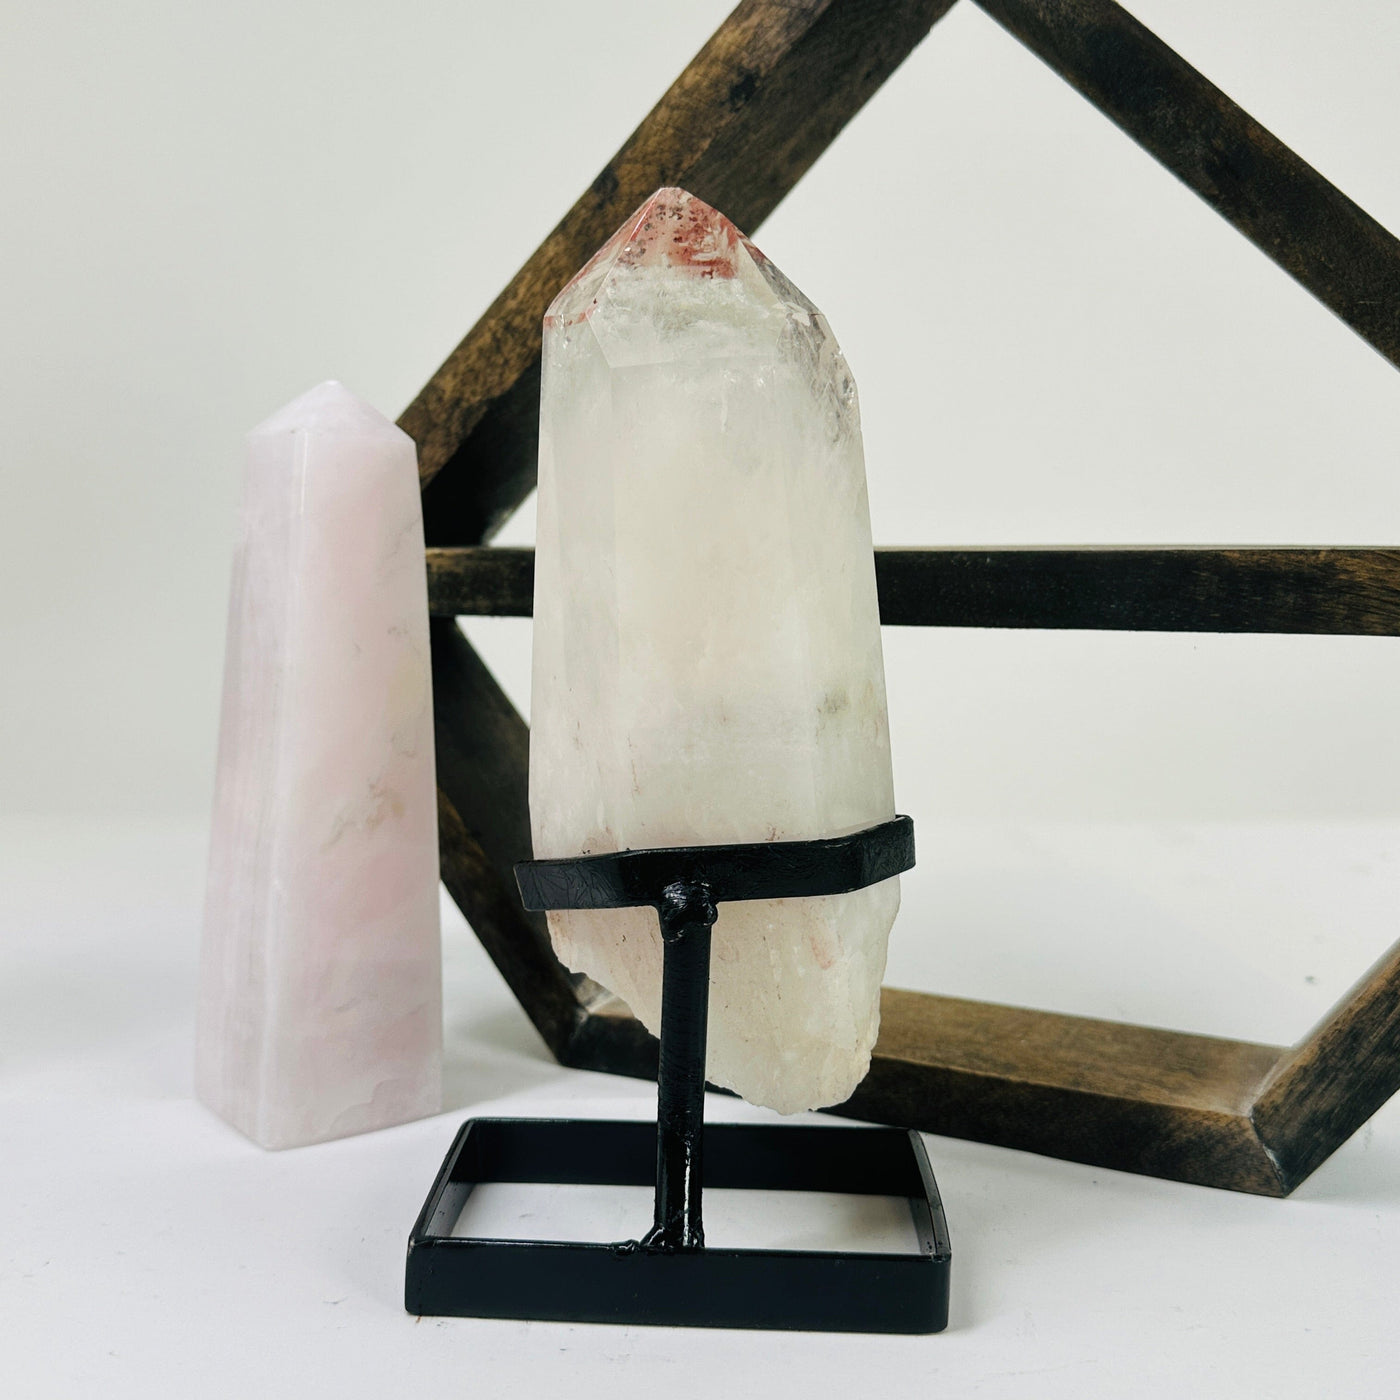 crystal quartz on metal stand with decorations in the background